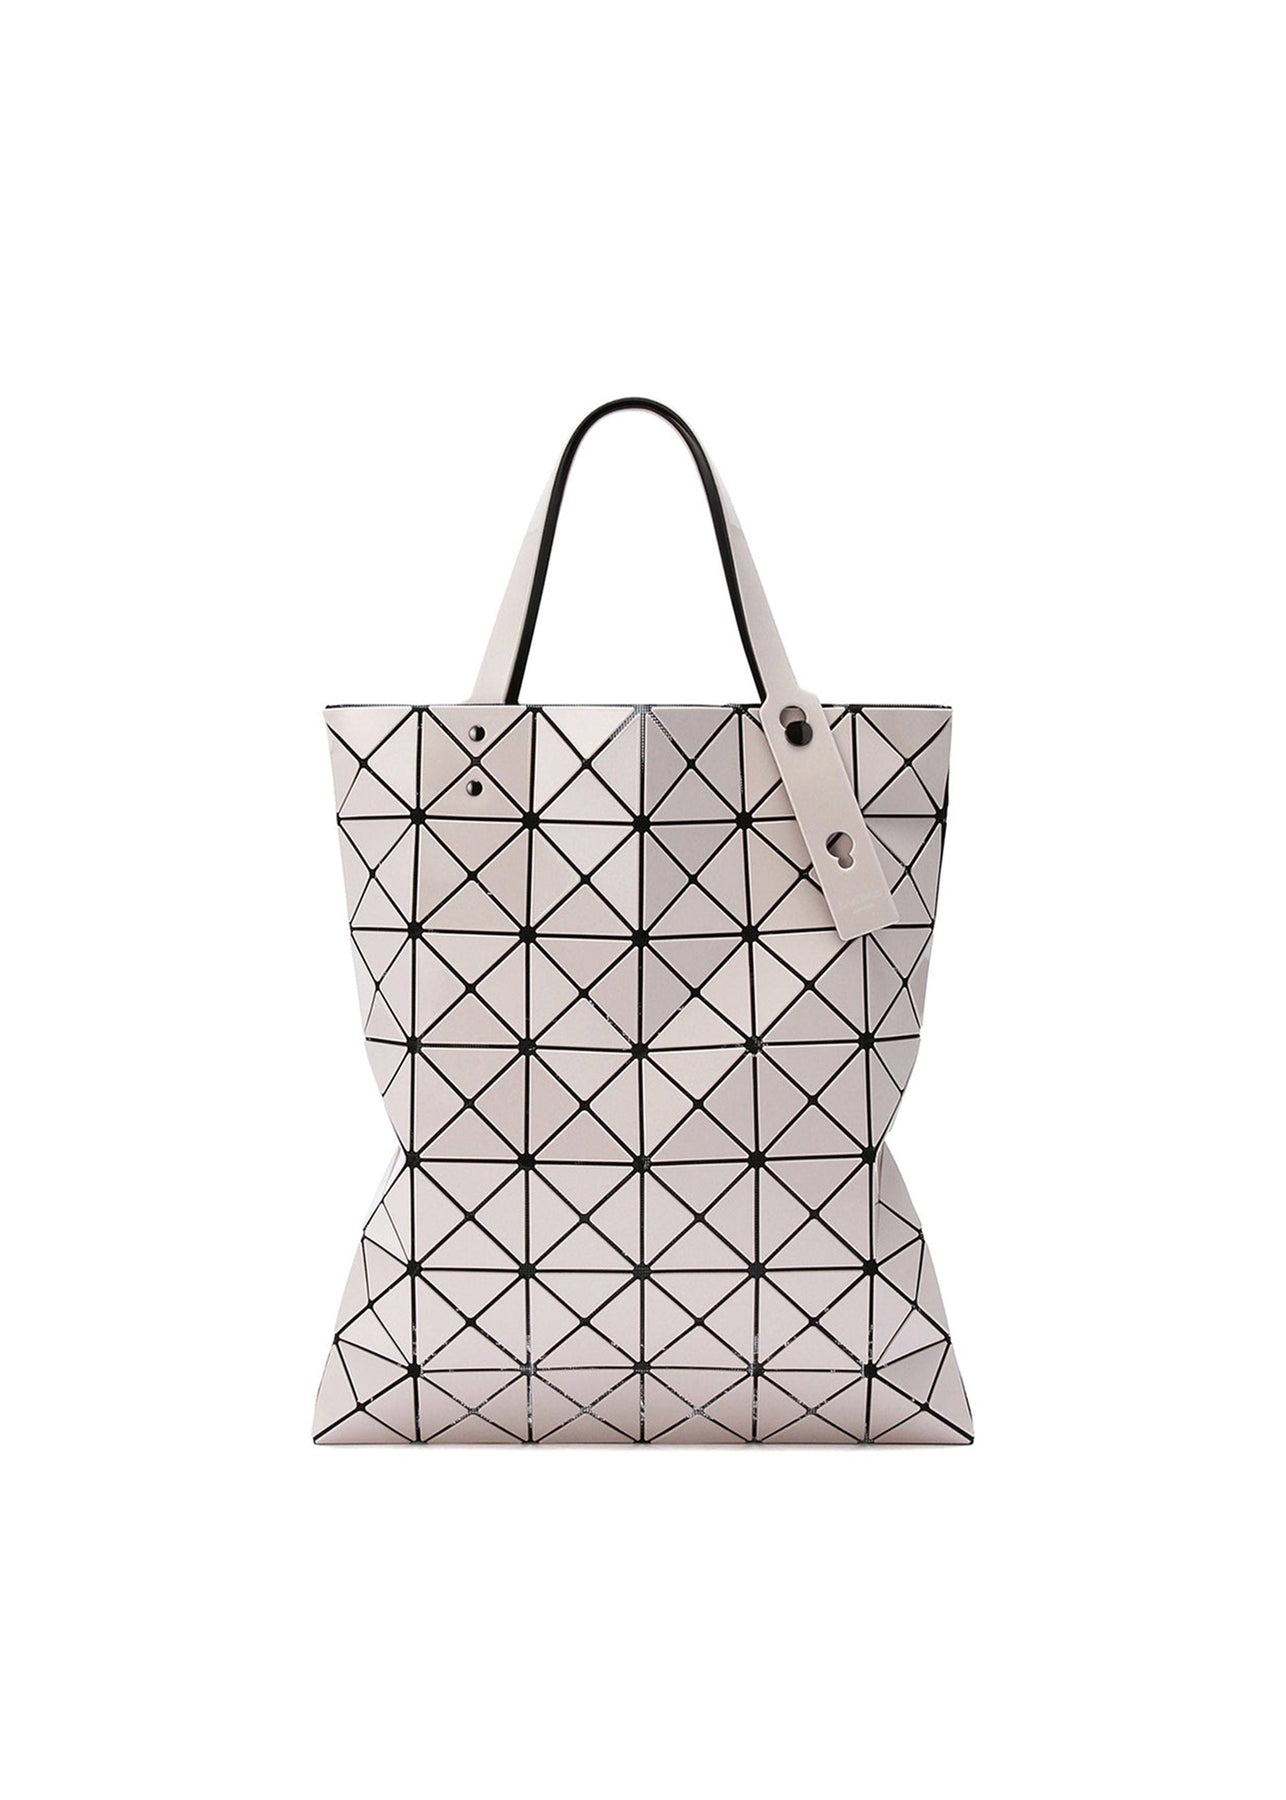 LUCENT TOTE BAG | The official ISSEY MIYAKE ONLINE STORE | ISSEY